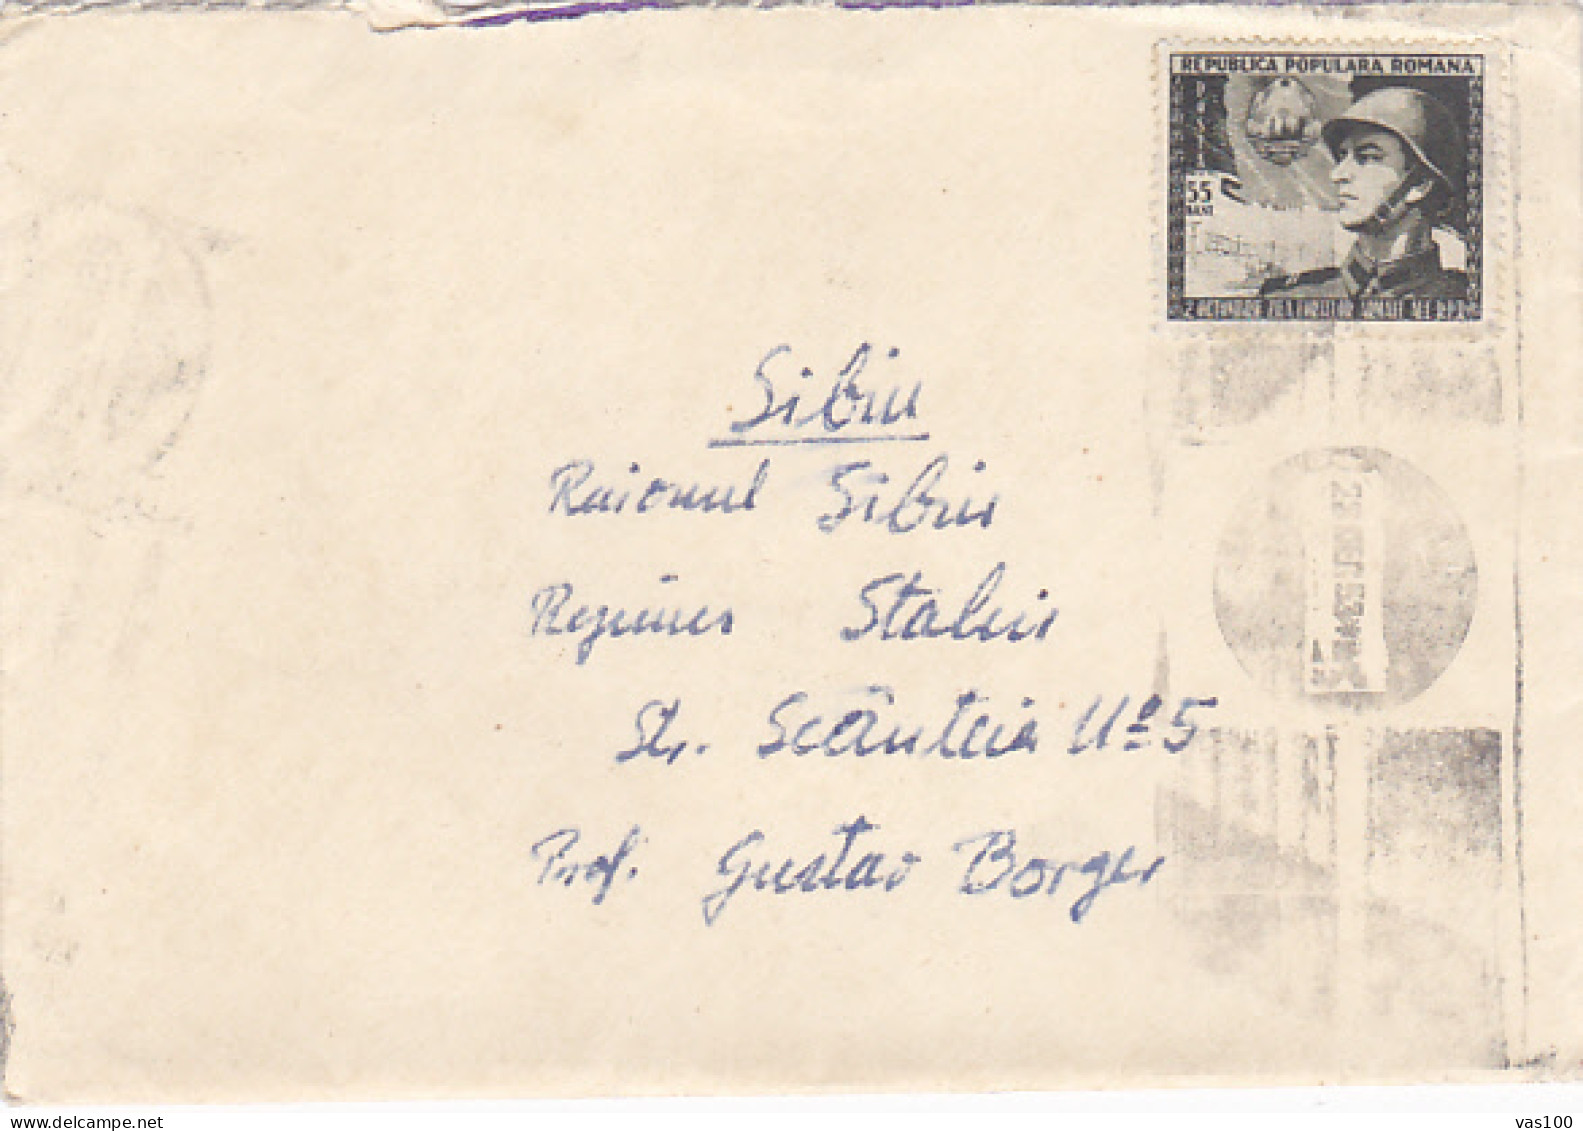 ARMY DAY, SOLDIER, STAMP ON COVER, 1953, ROMANIA - Covers & Documents